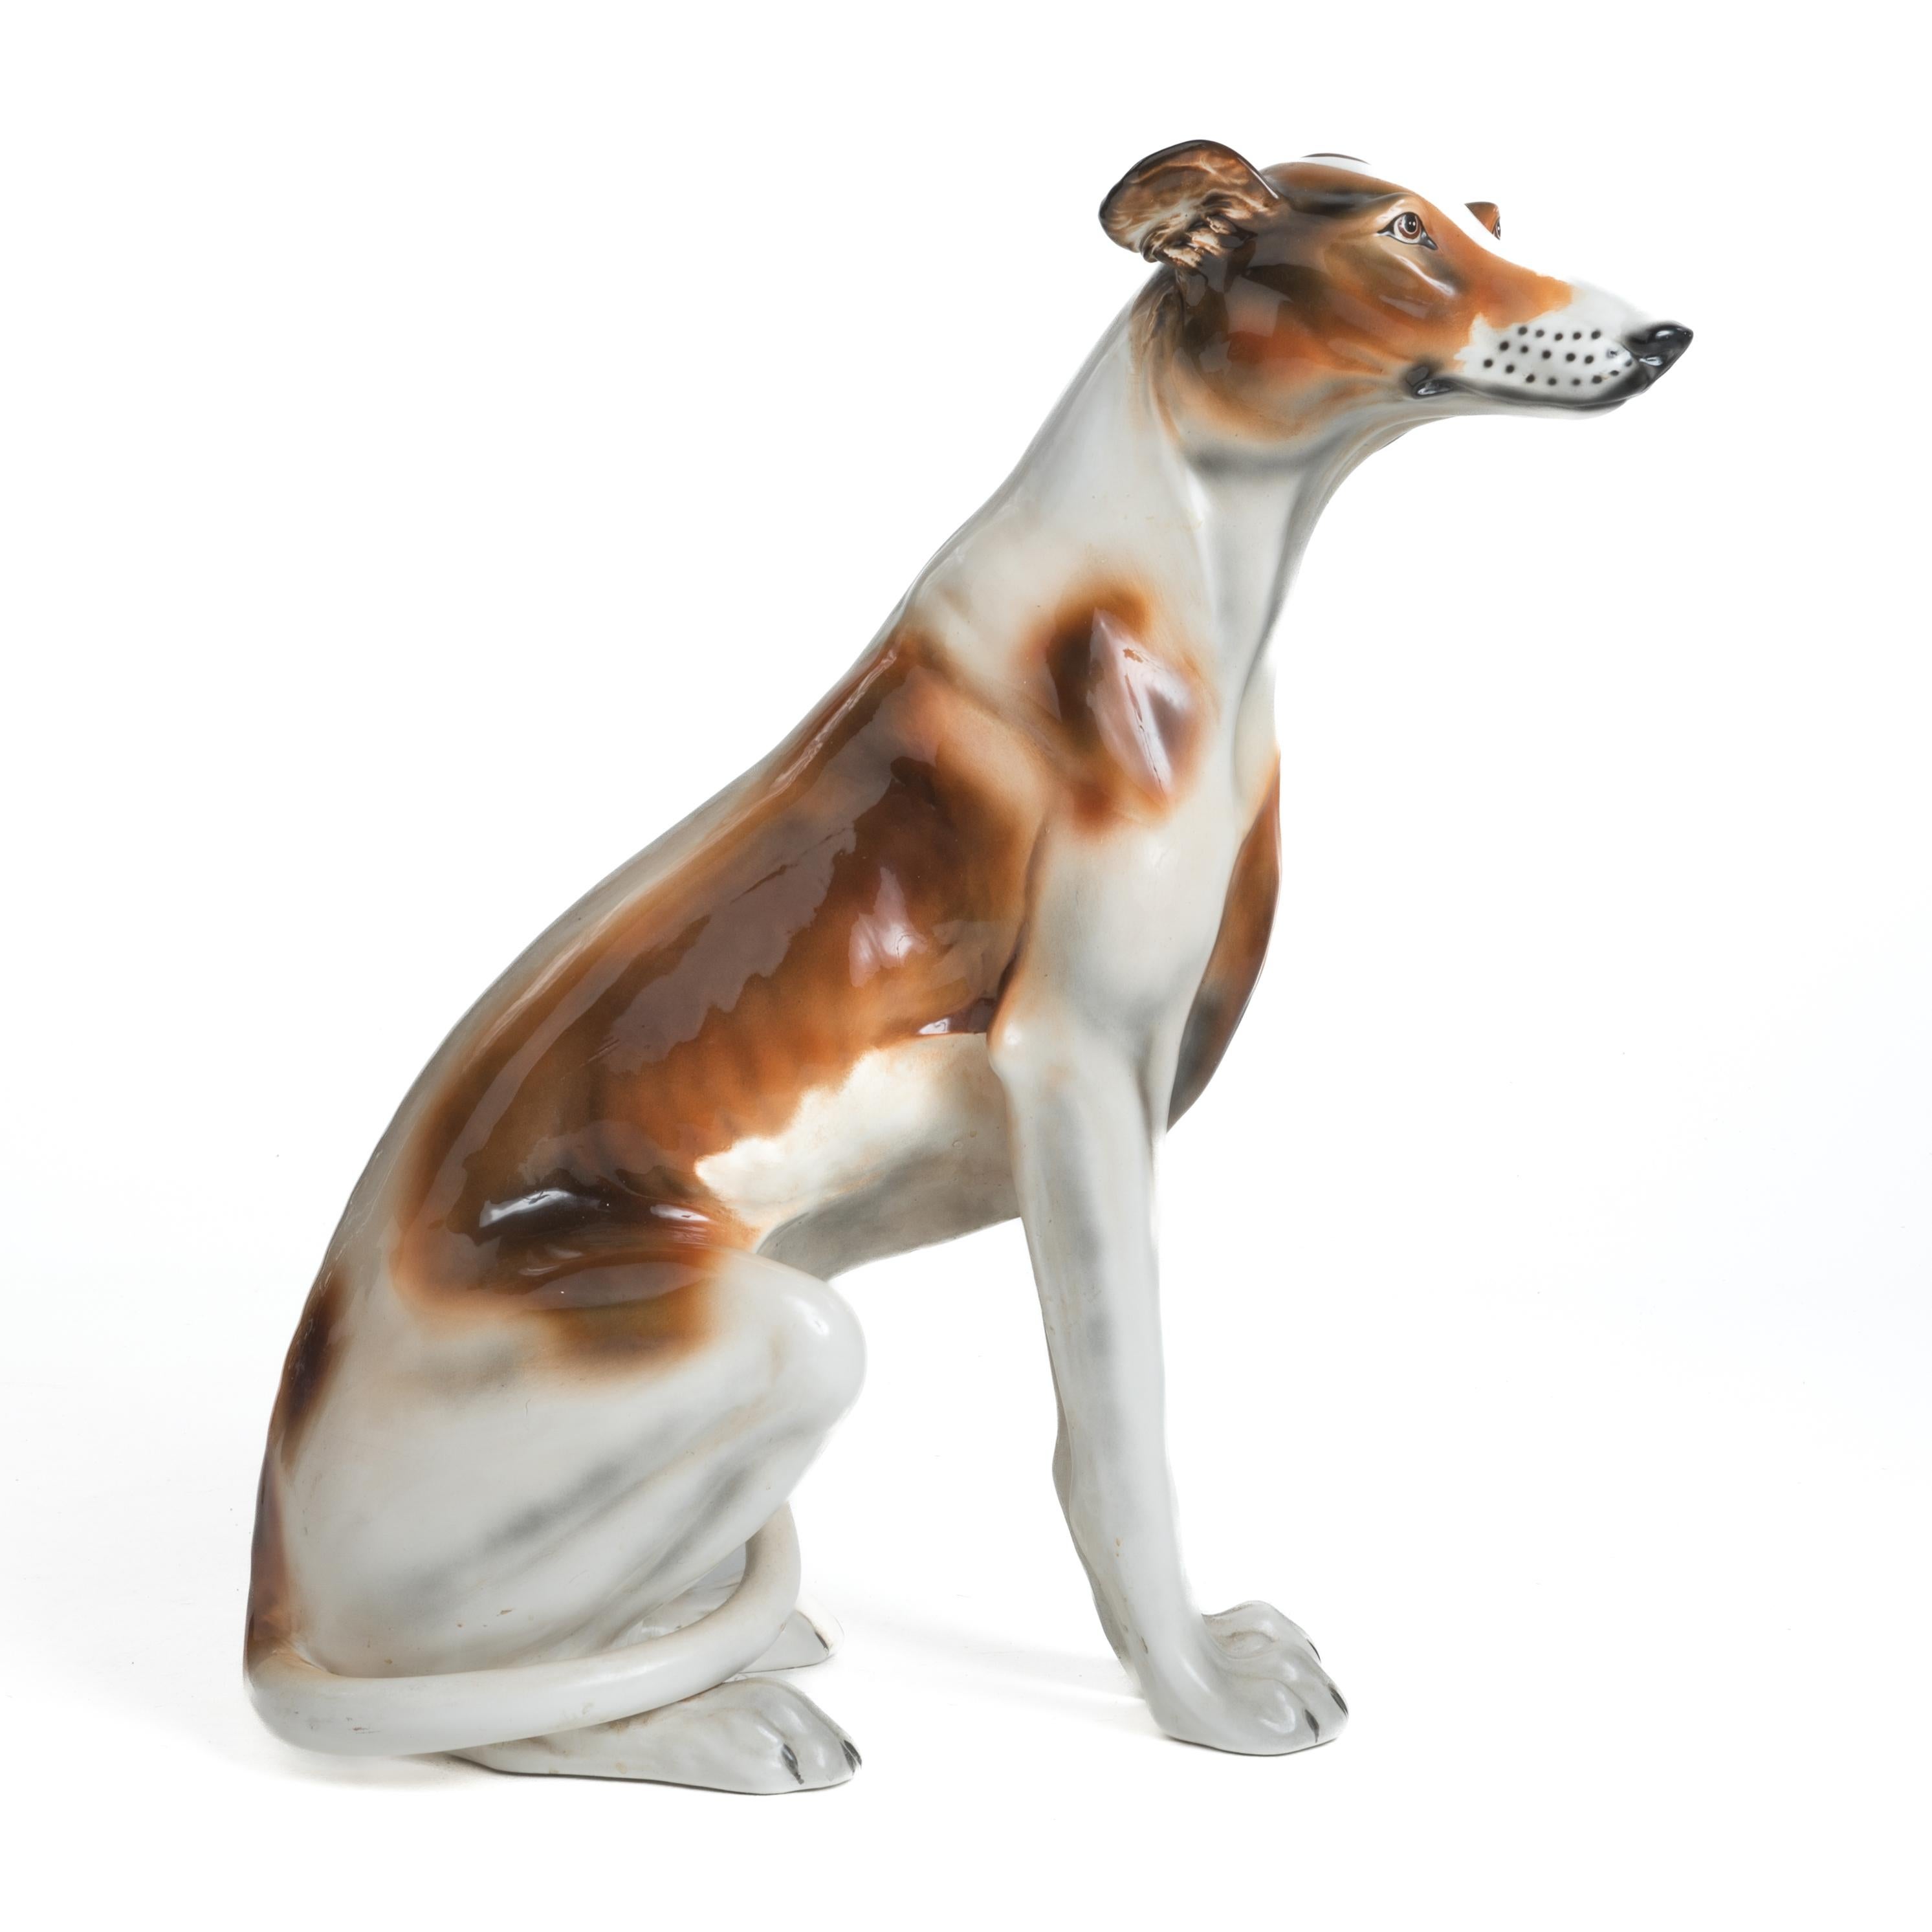 A very realistic, life size Italian Greyhound Sculpture designed and manufactured by Favaro Cecchetto in Italy. 1960s. Signed on the base.